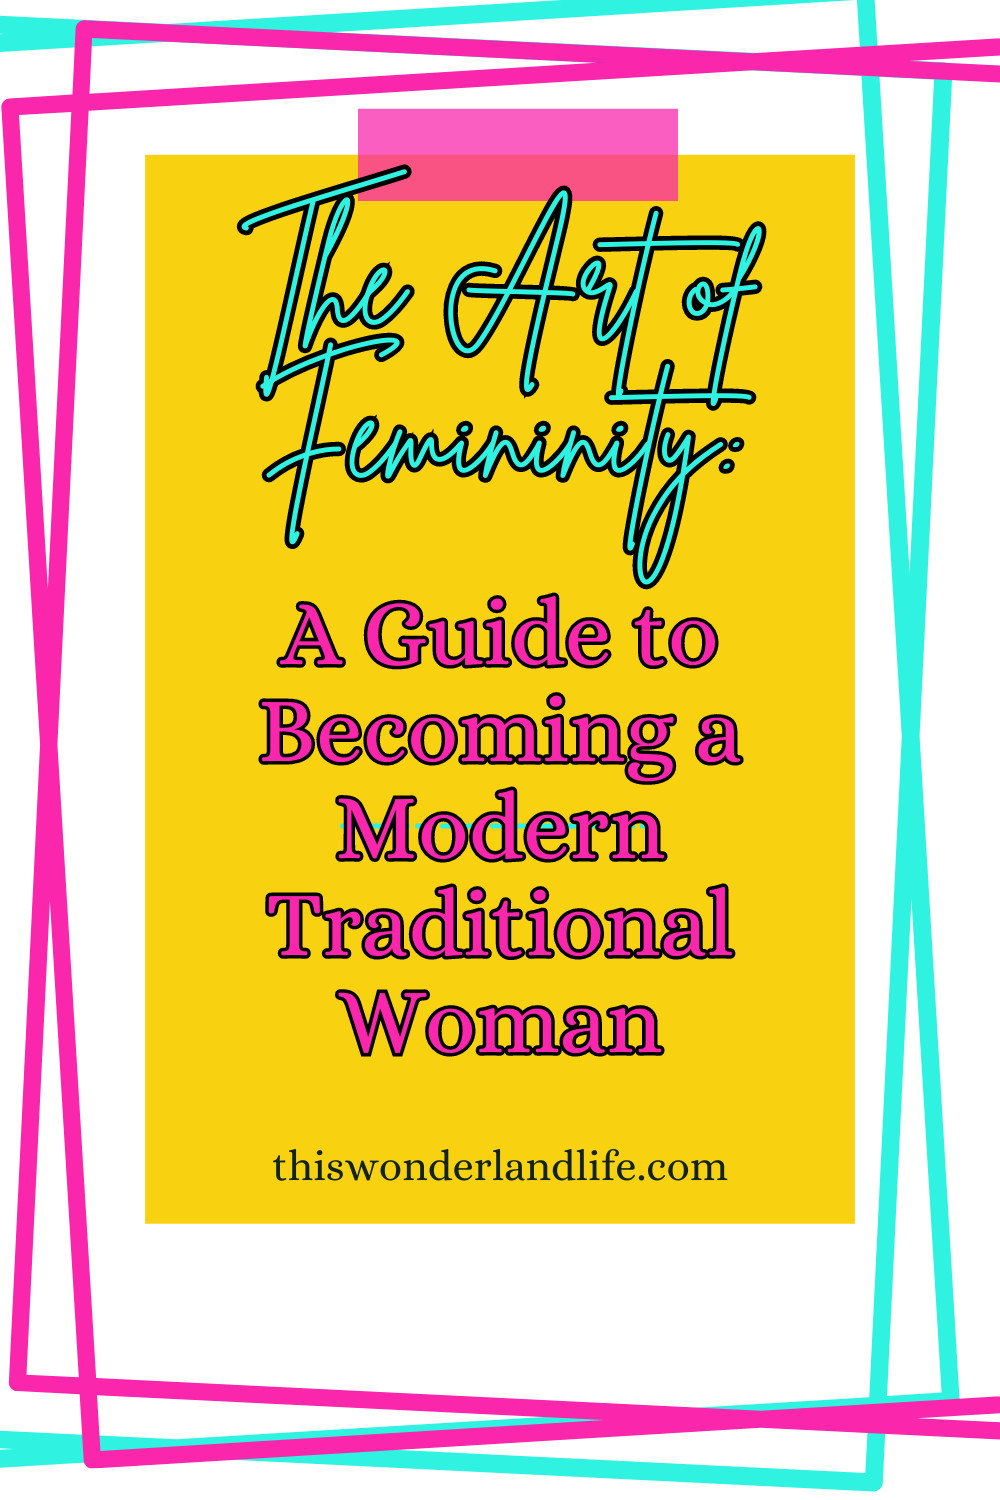 The Art of Femininity: A Guide to Becoming a Modern Traditional Woman